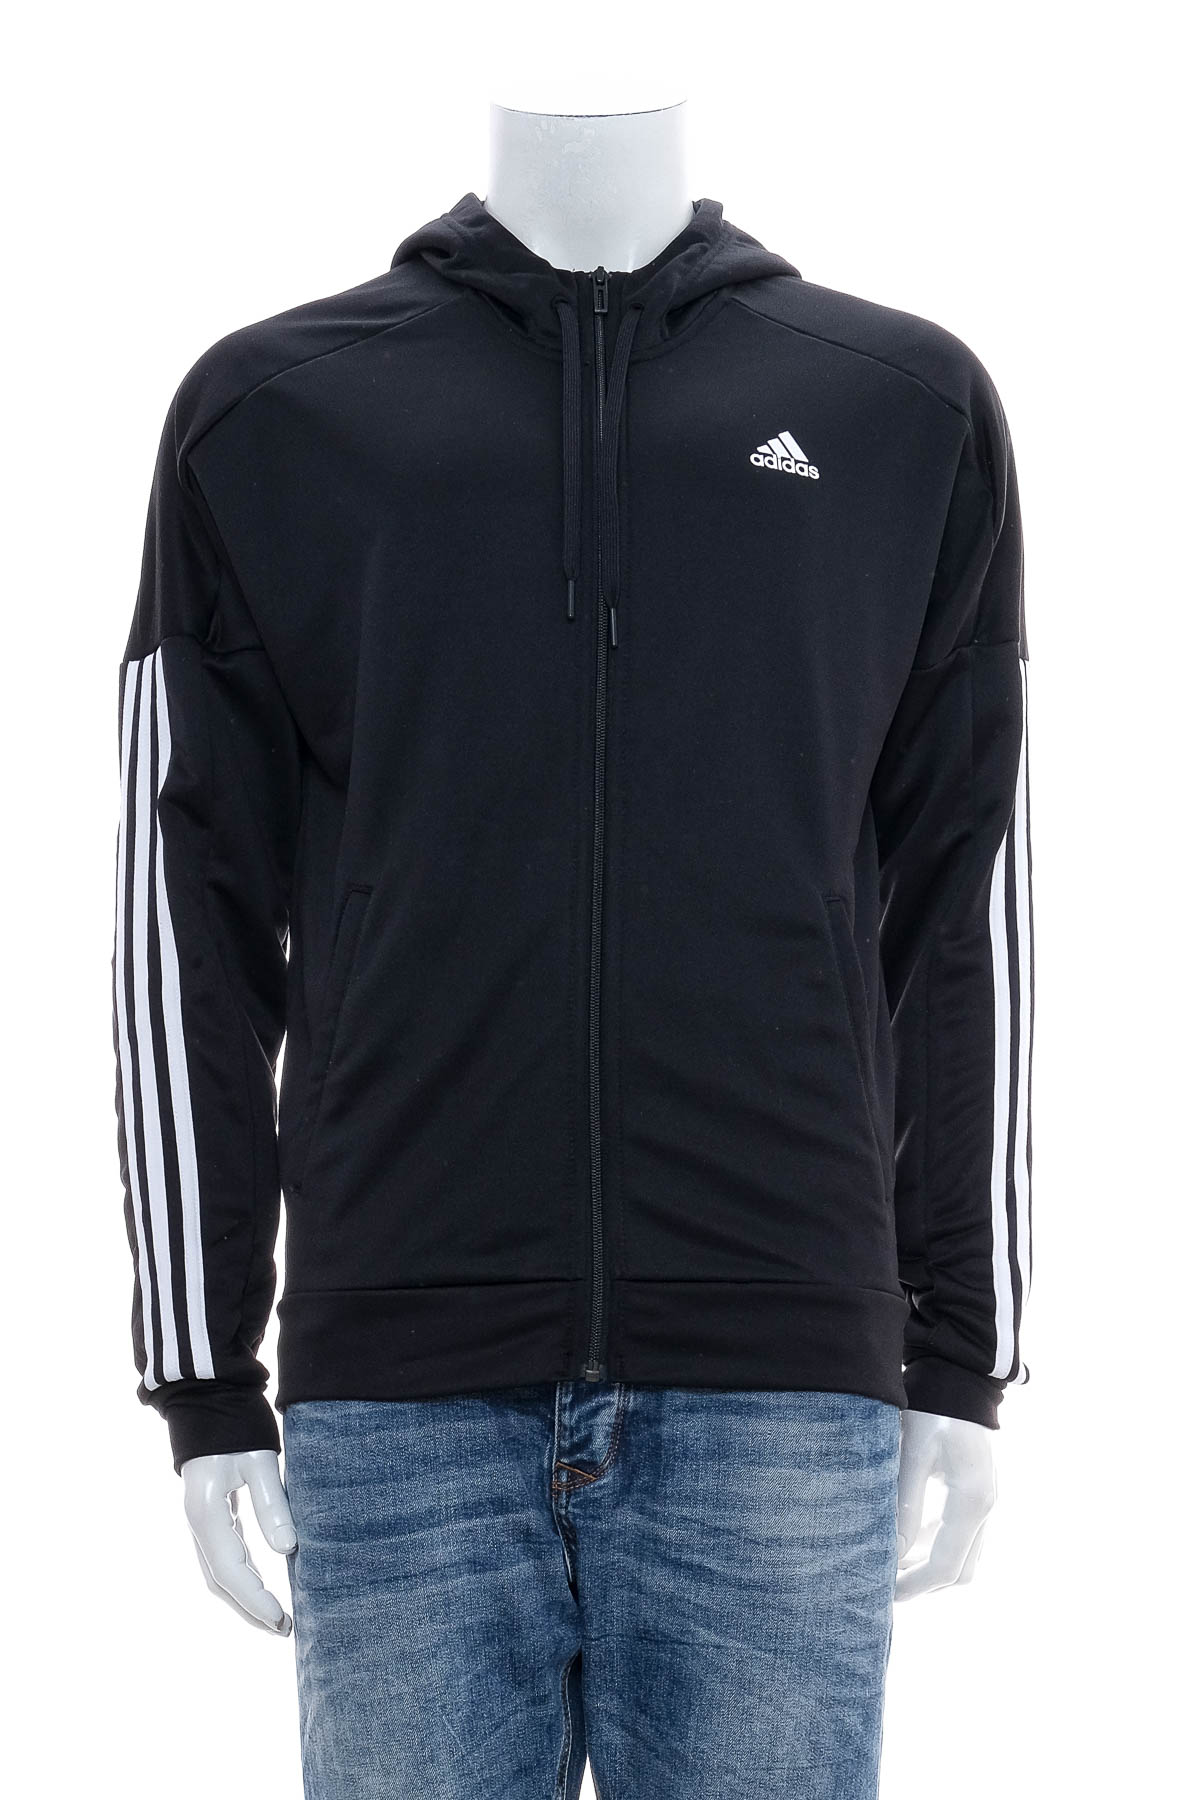 Male sports top - Adidas - 0